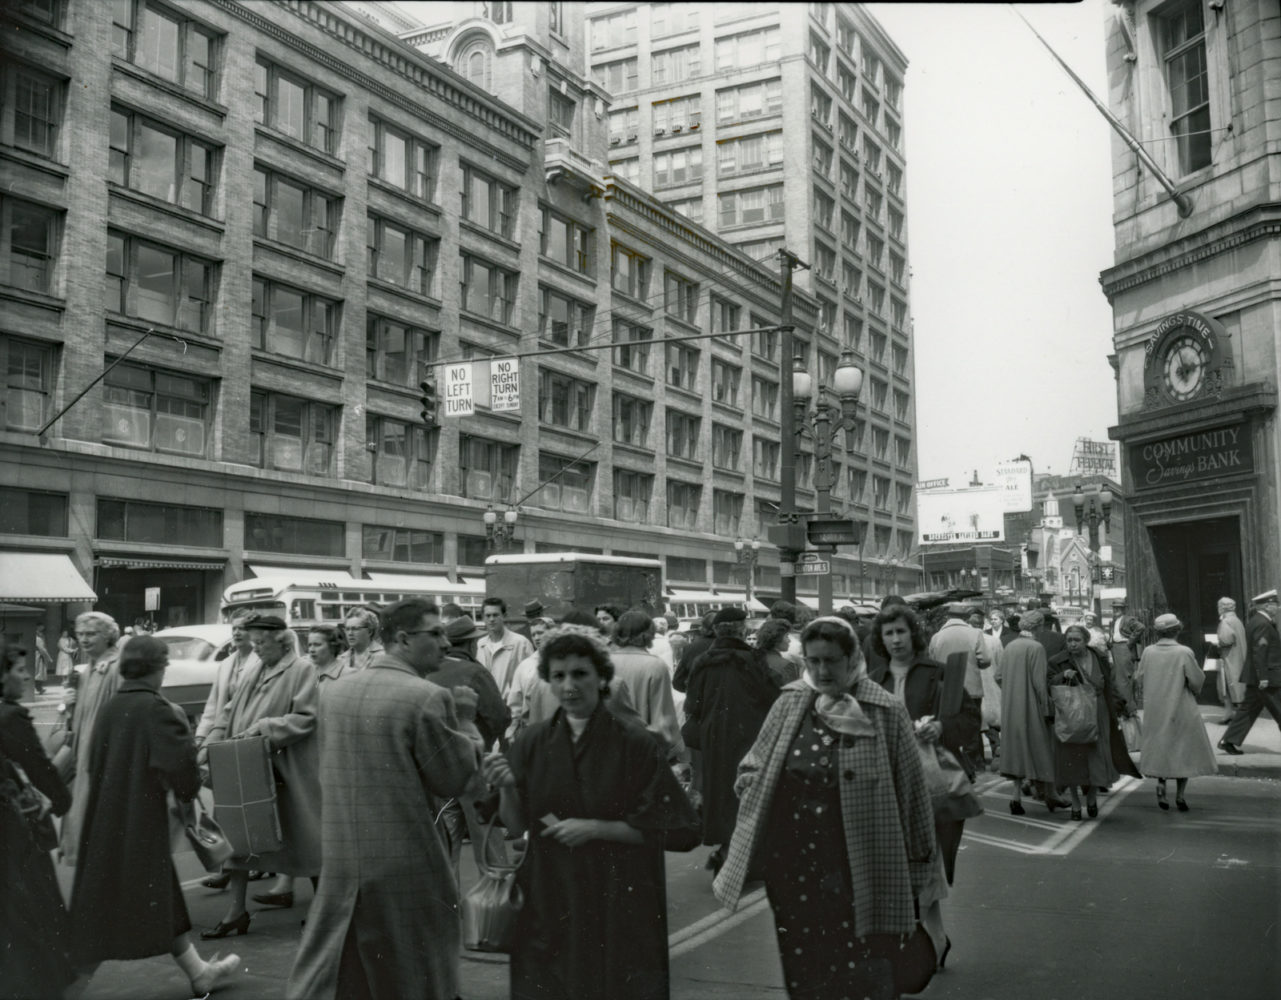 Main and Clinton mid 1950s, downtown Rochester – photo from City of Rochester